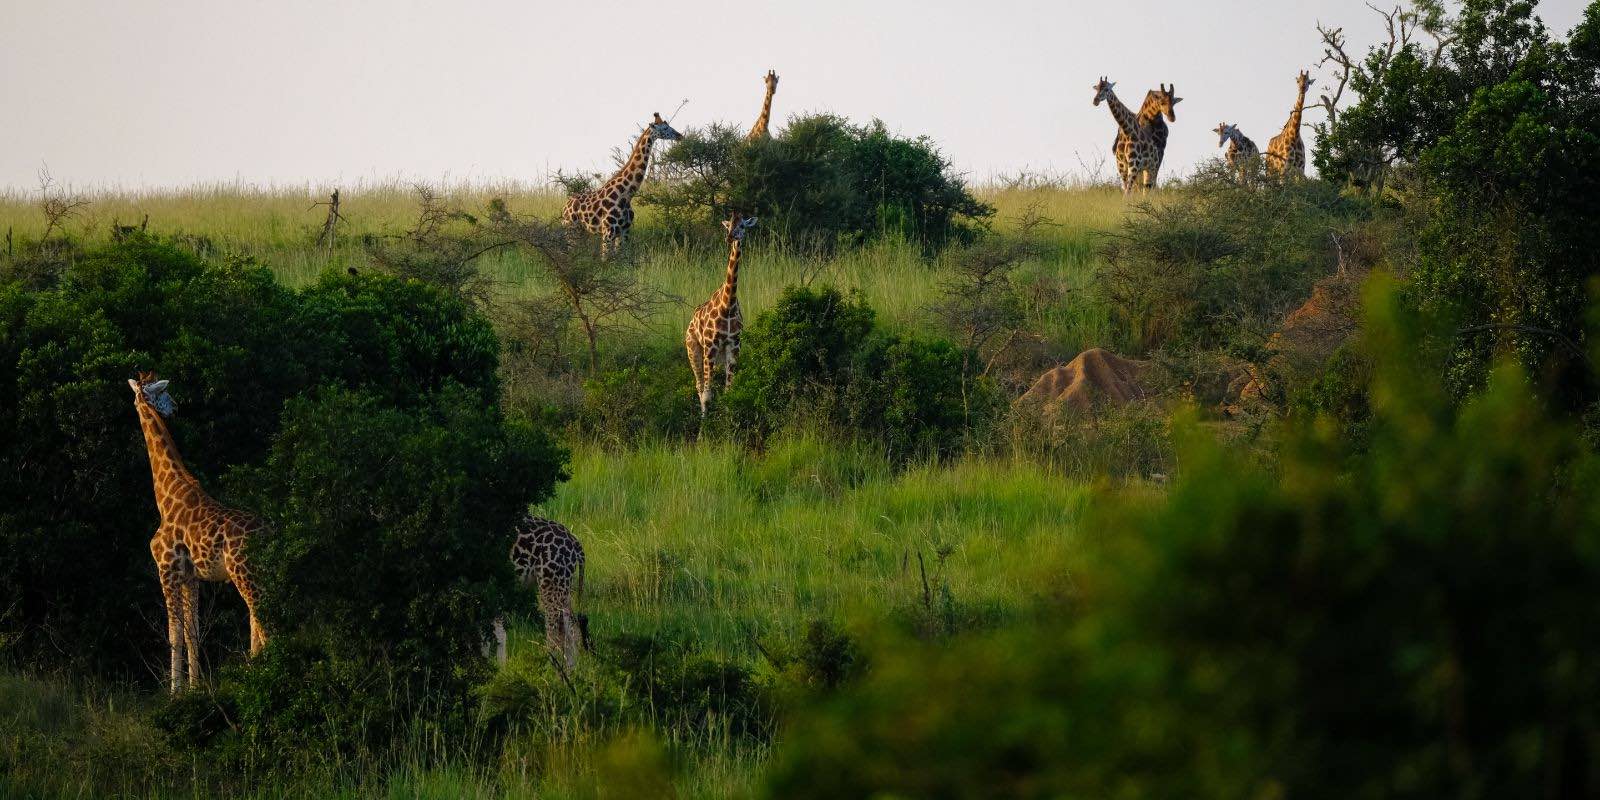 standing giraffes scattered on a grass field in Africa